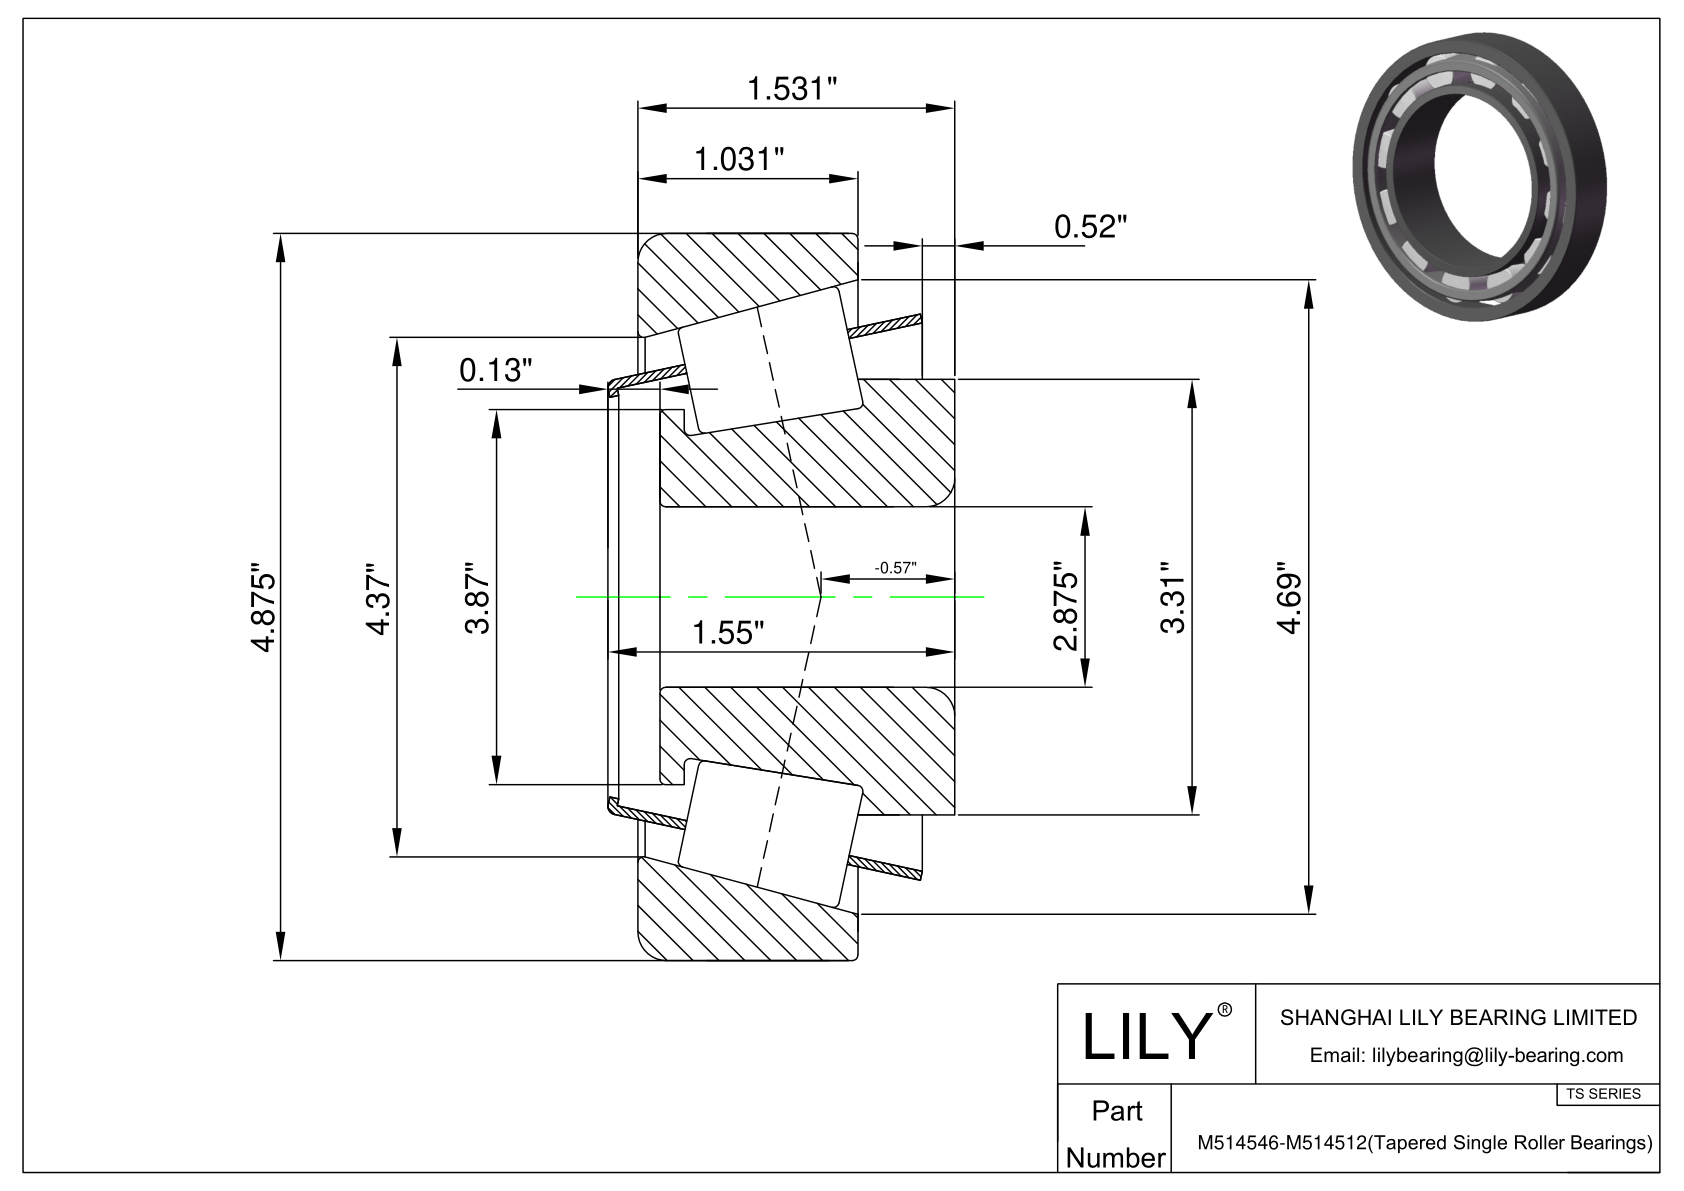 M514546-M514512 TS (Tapered Single Roller Bearings) (Imperial) cad drawing